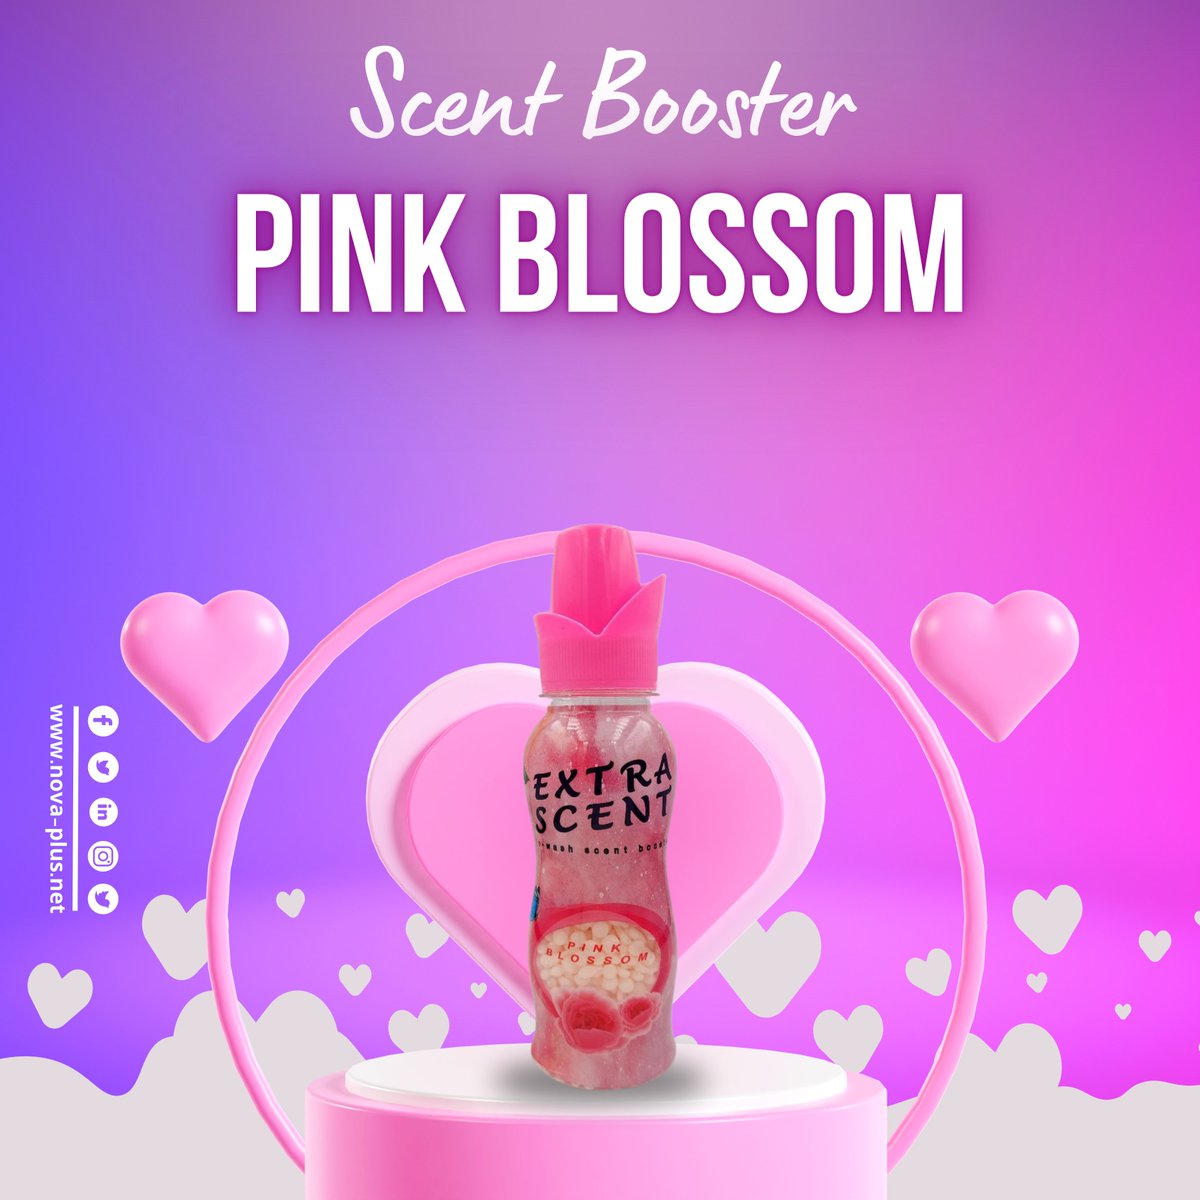 Nova Plus International Trading

Product: Extra Scent Pink Blossom

Clothes freshener granules give your clothes an amazing luster

 #scentbooster #scentboosters #scentboosterbeads #pinkblossom #pinkblossoms #pinkblossomsa #exportproduct #exportproducts #turkey